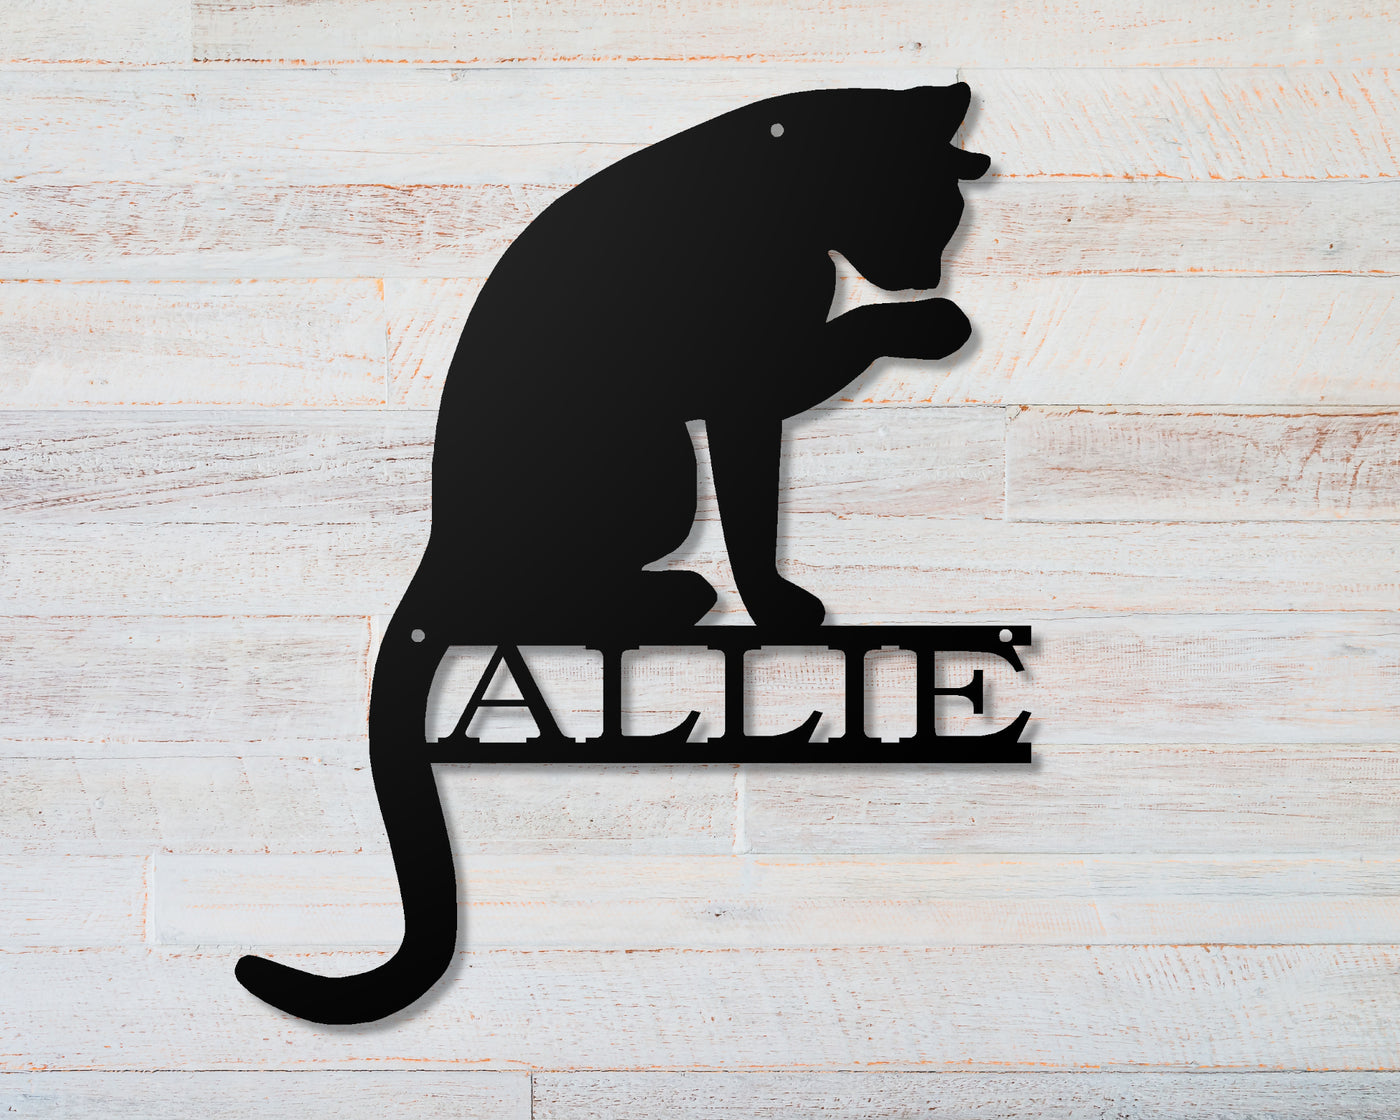 Personalized Cat Metal Sign - Madison Iron and Wood - Personalized sign - metal outdoor decor - Steel deocrations - american made products - veteran owned business products - fencing decorations - fencing supplies - custom wall decorations - personalized wall signs - steel - decorative post caps - steel post caps - metal post caps - brackets - structural brackets - home improvement - easter - easter decorations - easter gift - easter yard decor